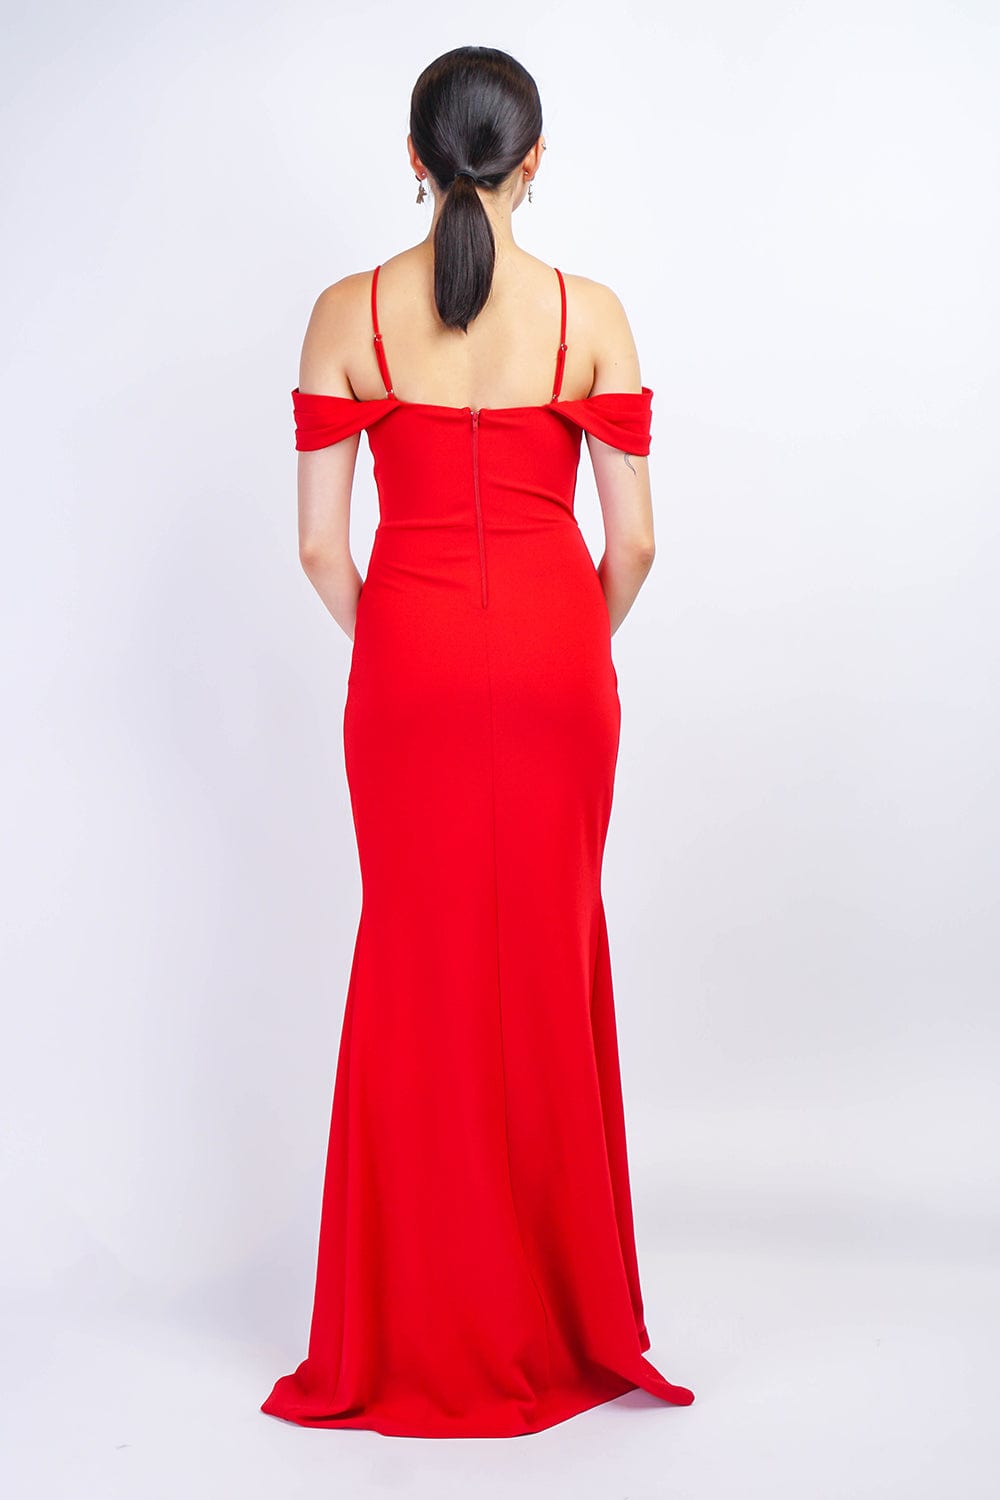 GOWNS Red Corset Mermaid Gown - Chloe Dao